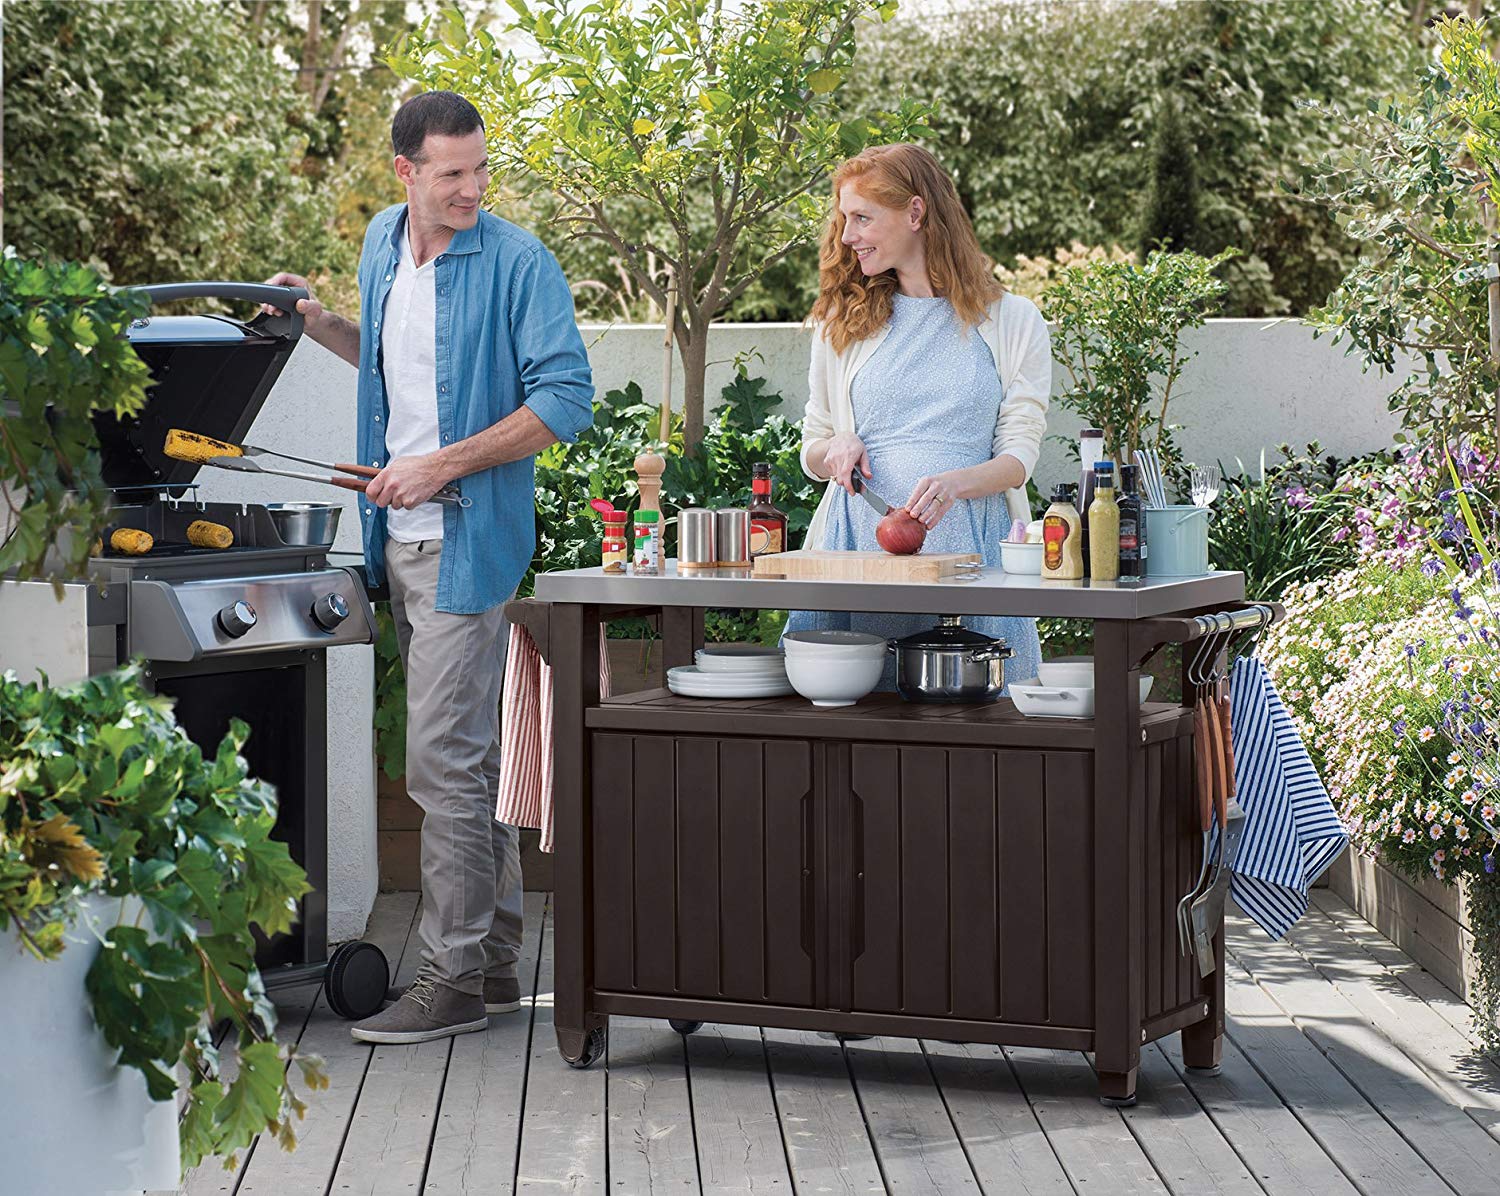 How to Make Backyard Barbecue Fun and Easy